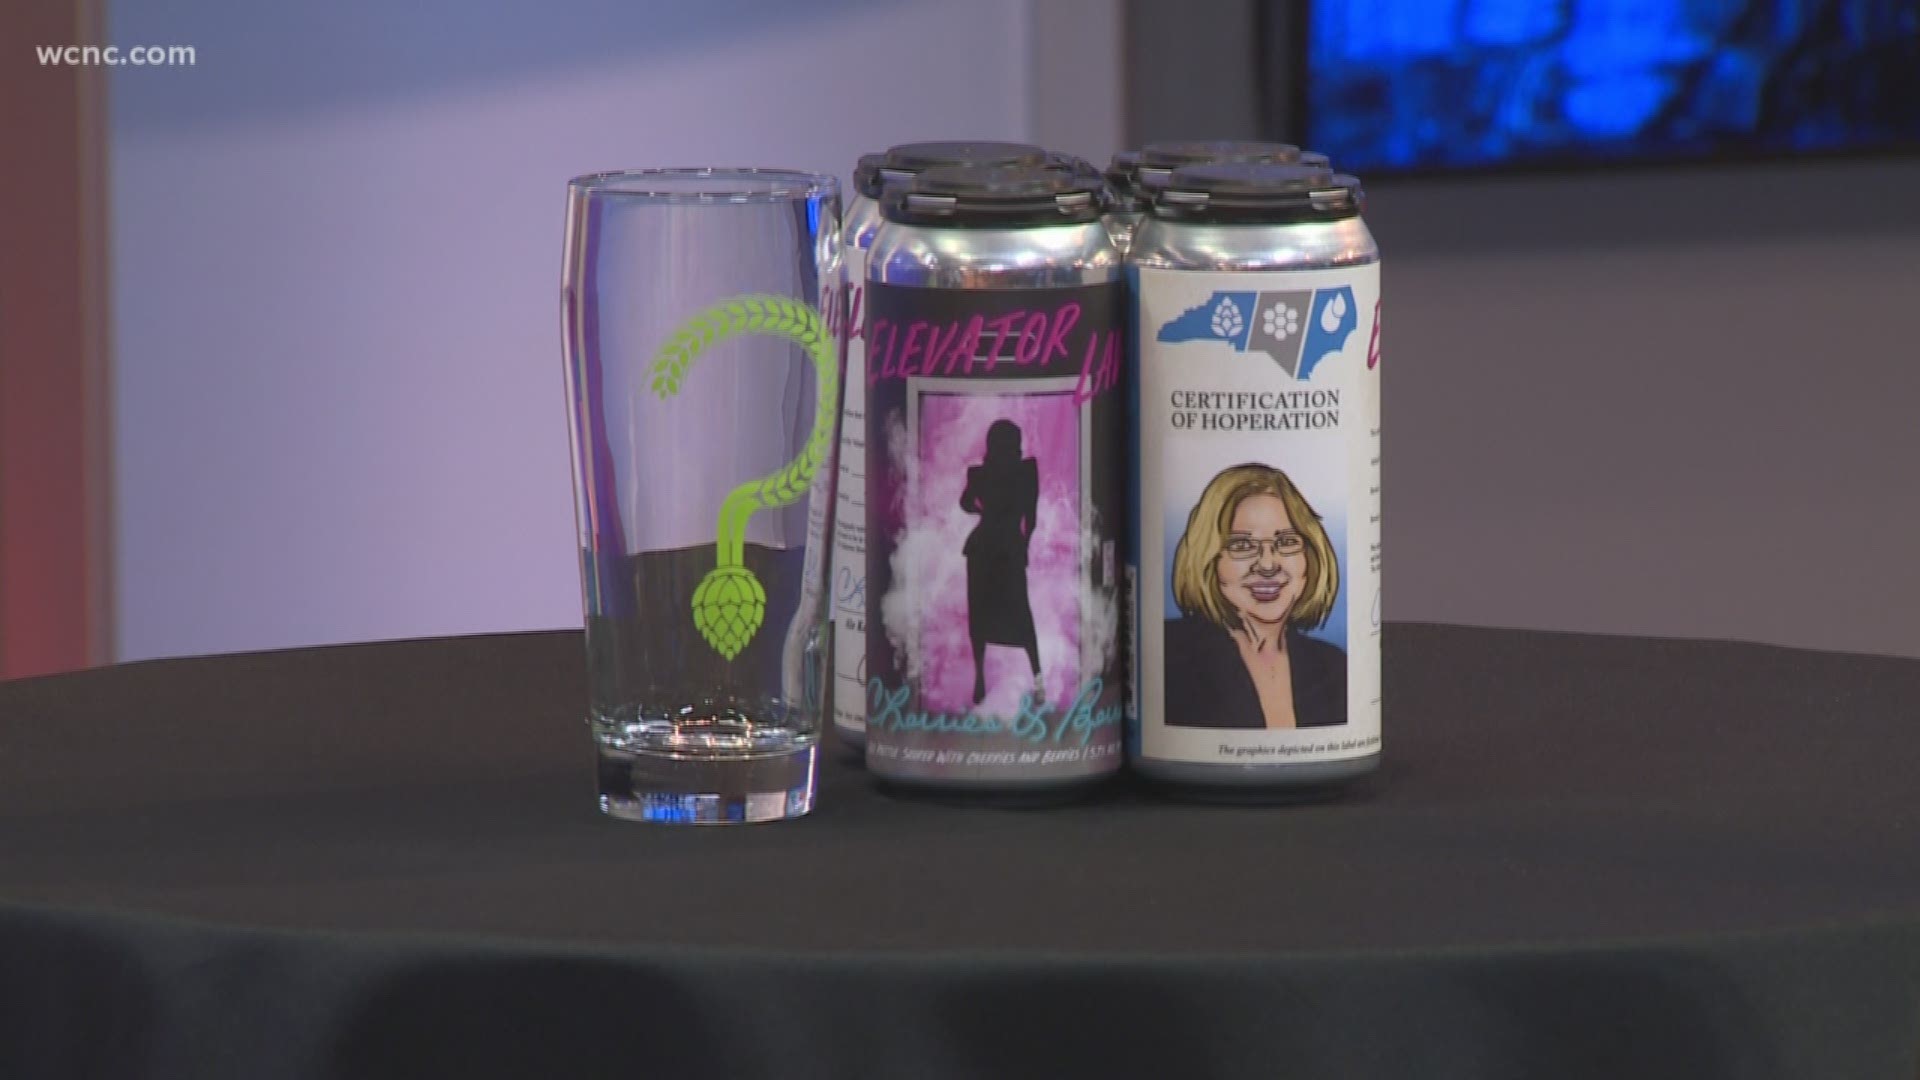 If you’ve been in a North Carolina elevator, you’ve seen Cherie Berry’s face on the wall. The Unknown Brewing Co. gets creative and pays tribute to the elevator lady with their newest beer.